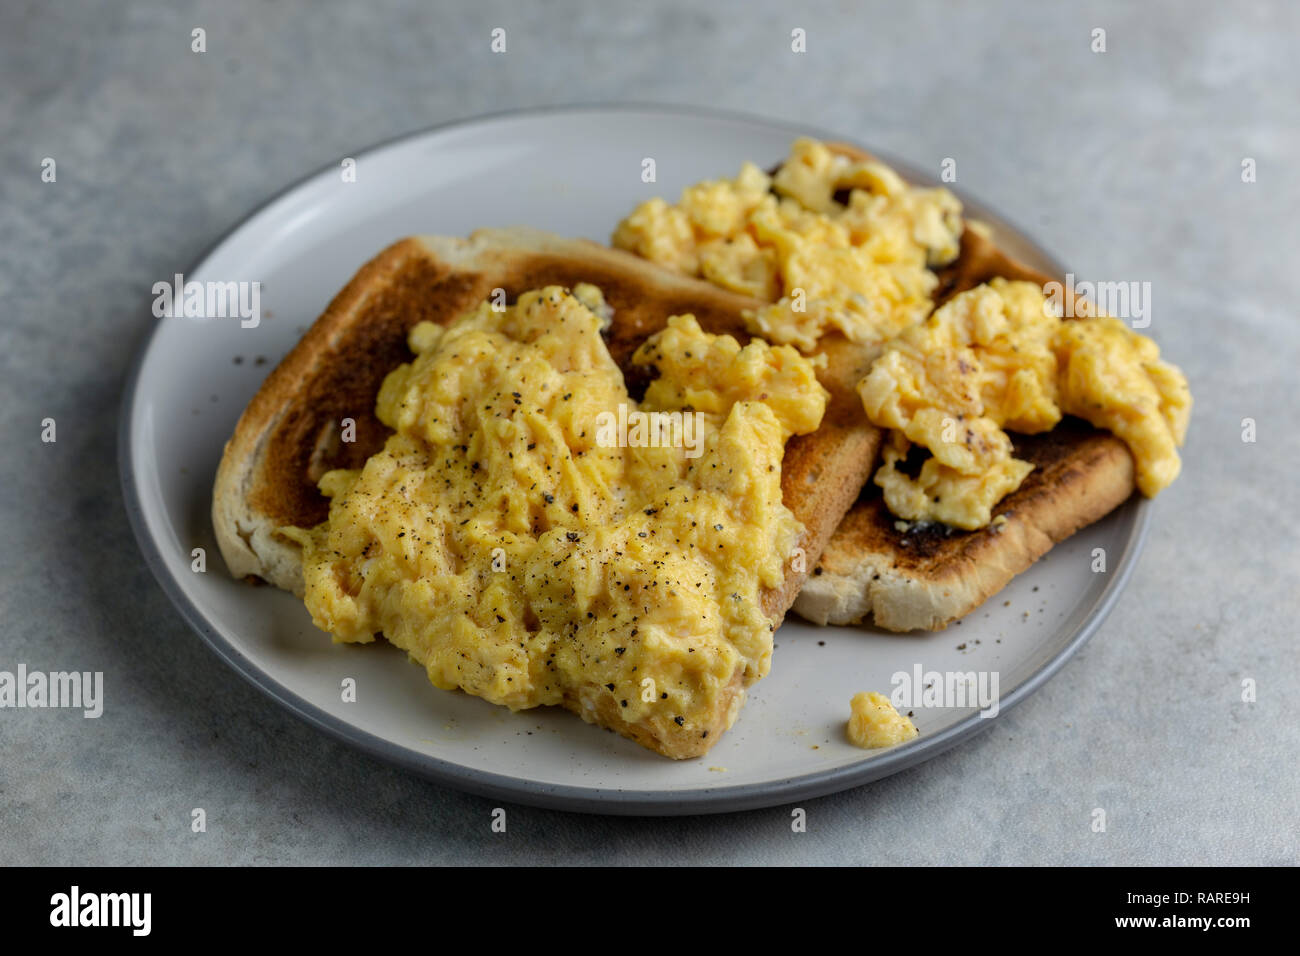 Scrambled eggs with black pepper on two pieces of toast on a white plate with a grey rim on a simple grey and white marbled background Stock Photo